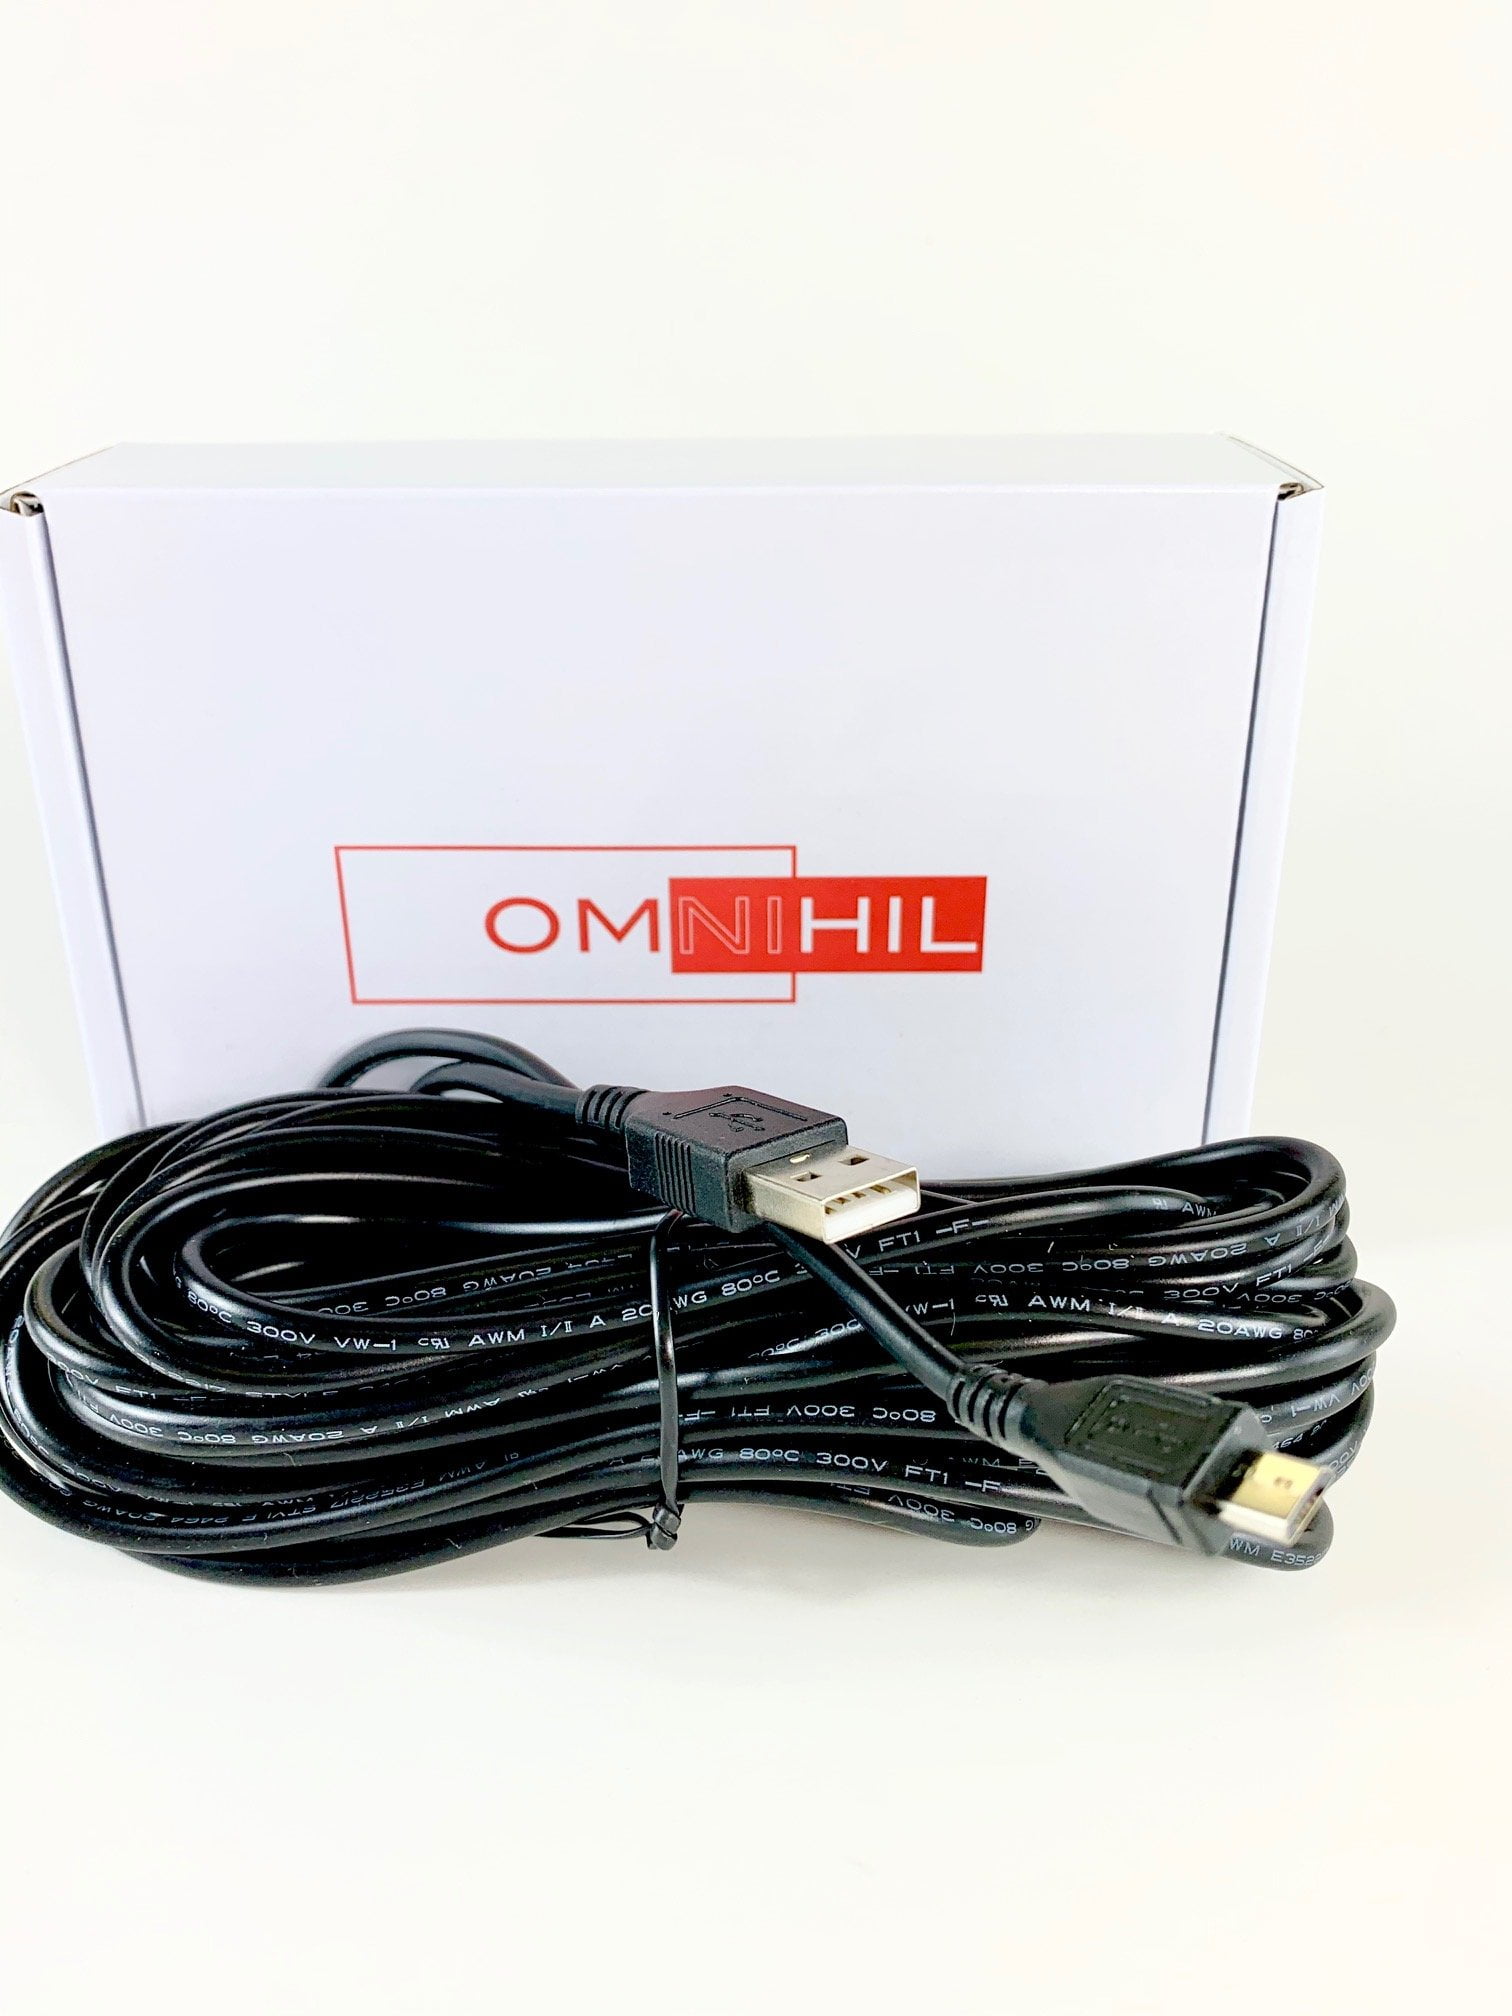 OMNIHIL 15 Feet Long High Speed USB 2.0 Cable Compatible with Brother MFC-7840W 